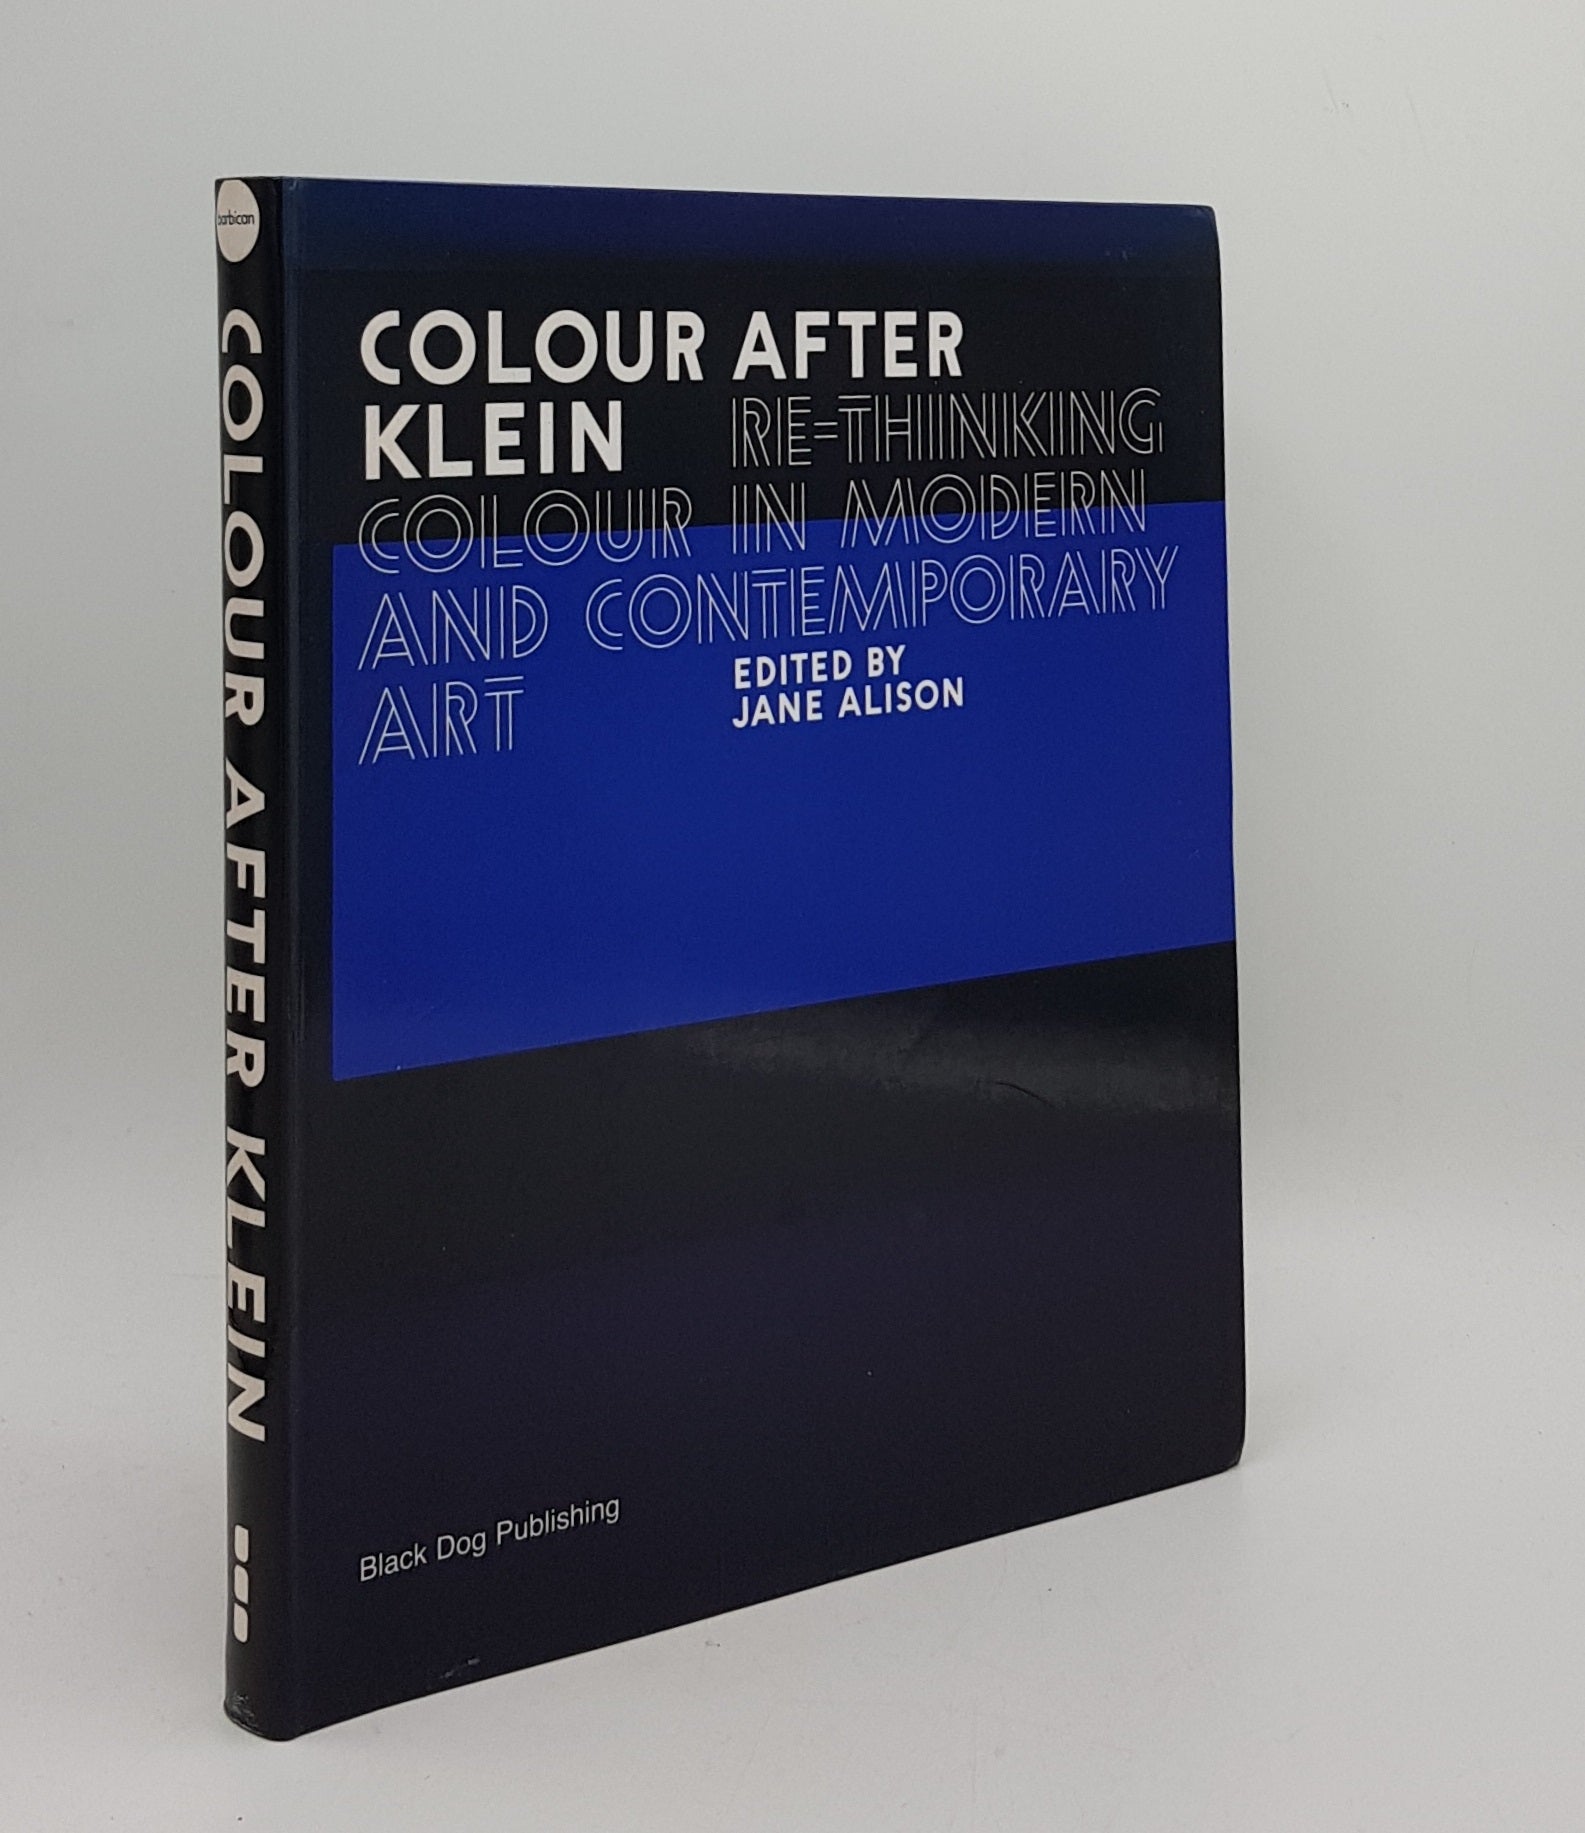 ALISON Jane, BANAI Nuit, et al. - Colour After Klein Re-Thinking Colour in Modern and Contemporary Art